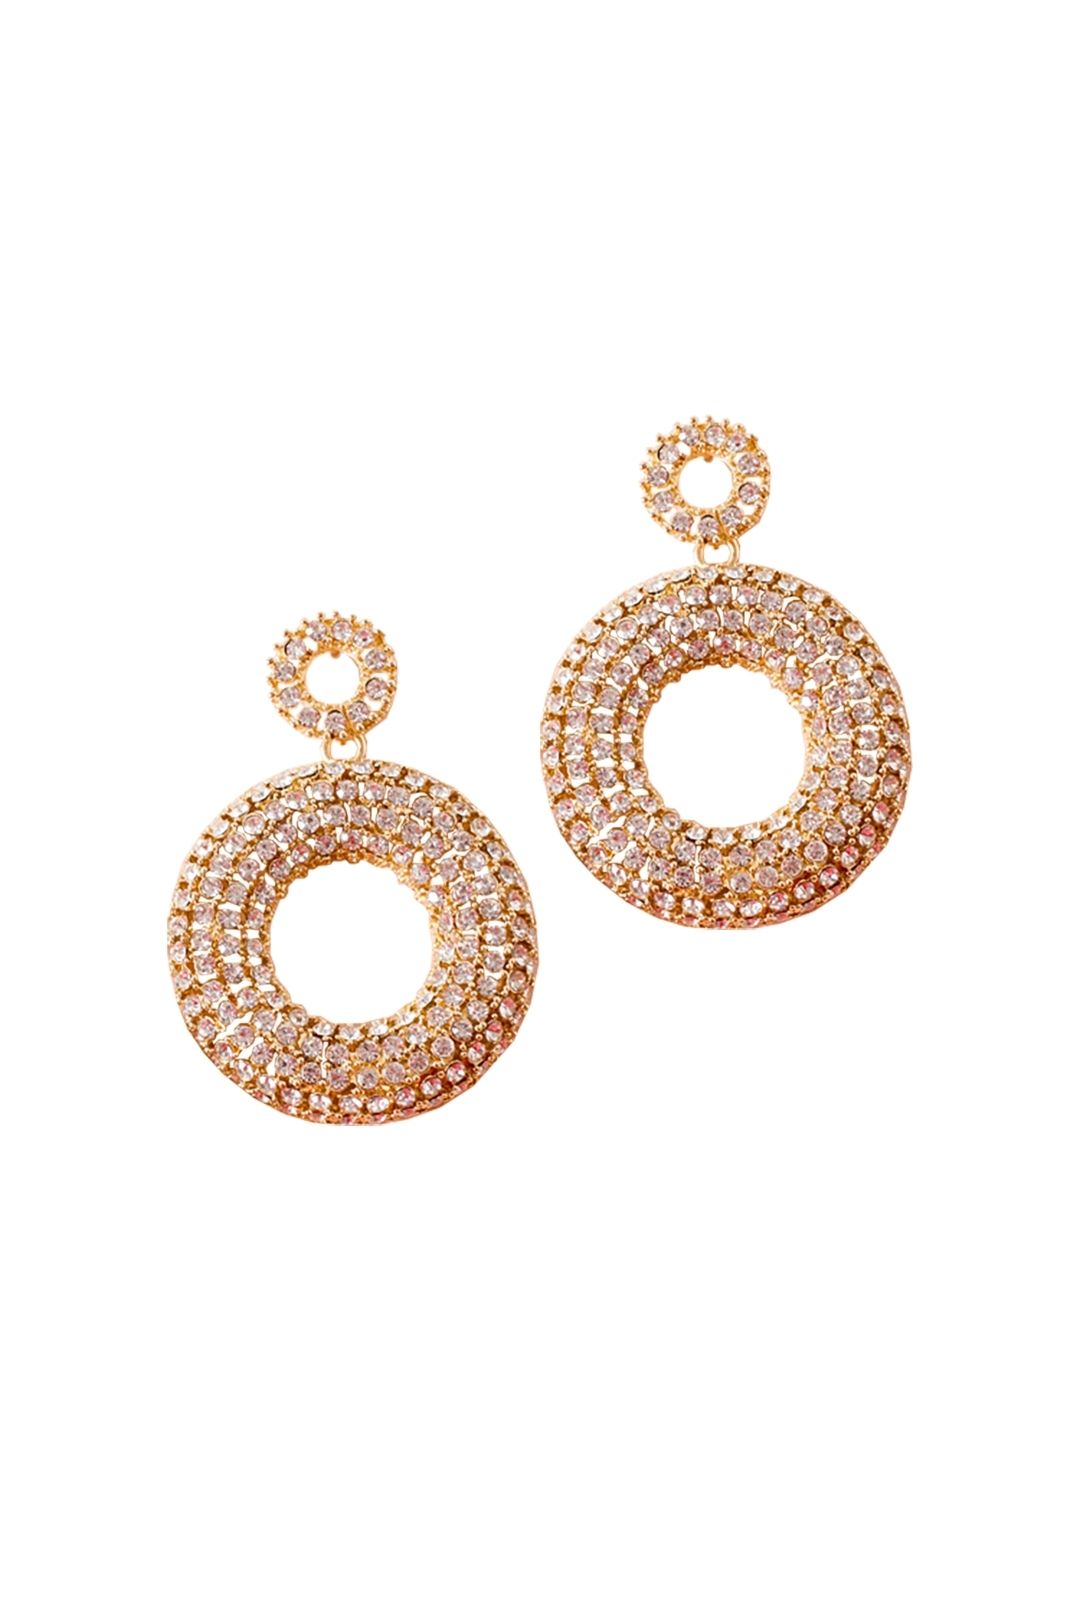 Adorne - Encrusted Ring Drop Statement Earrings - Gold - Front